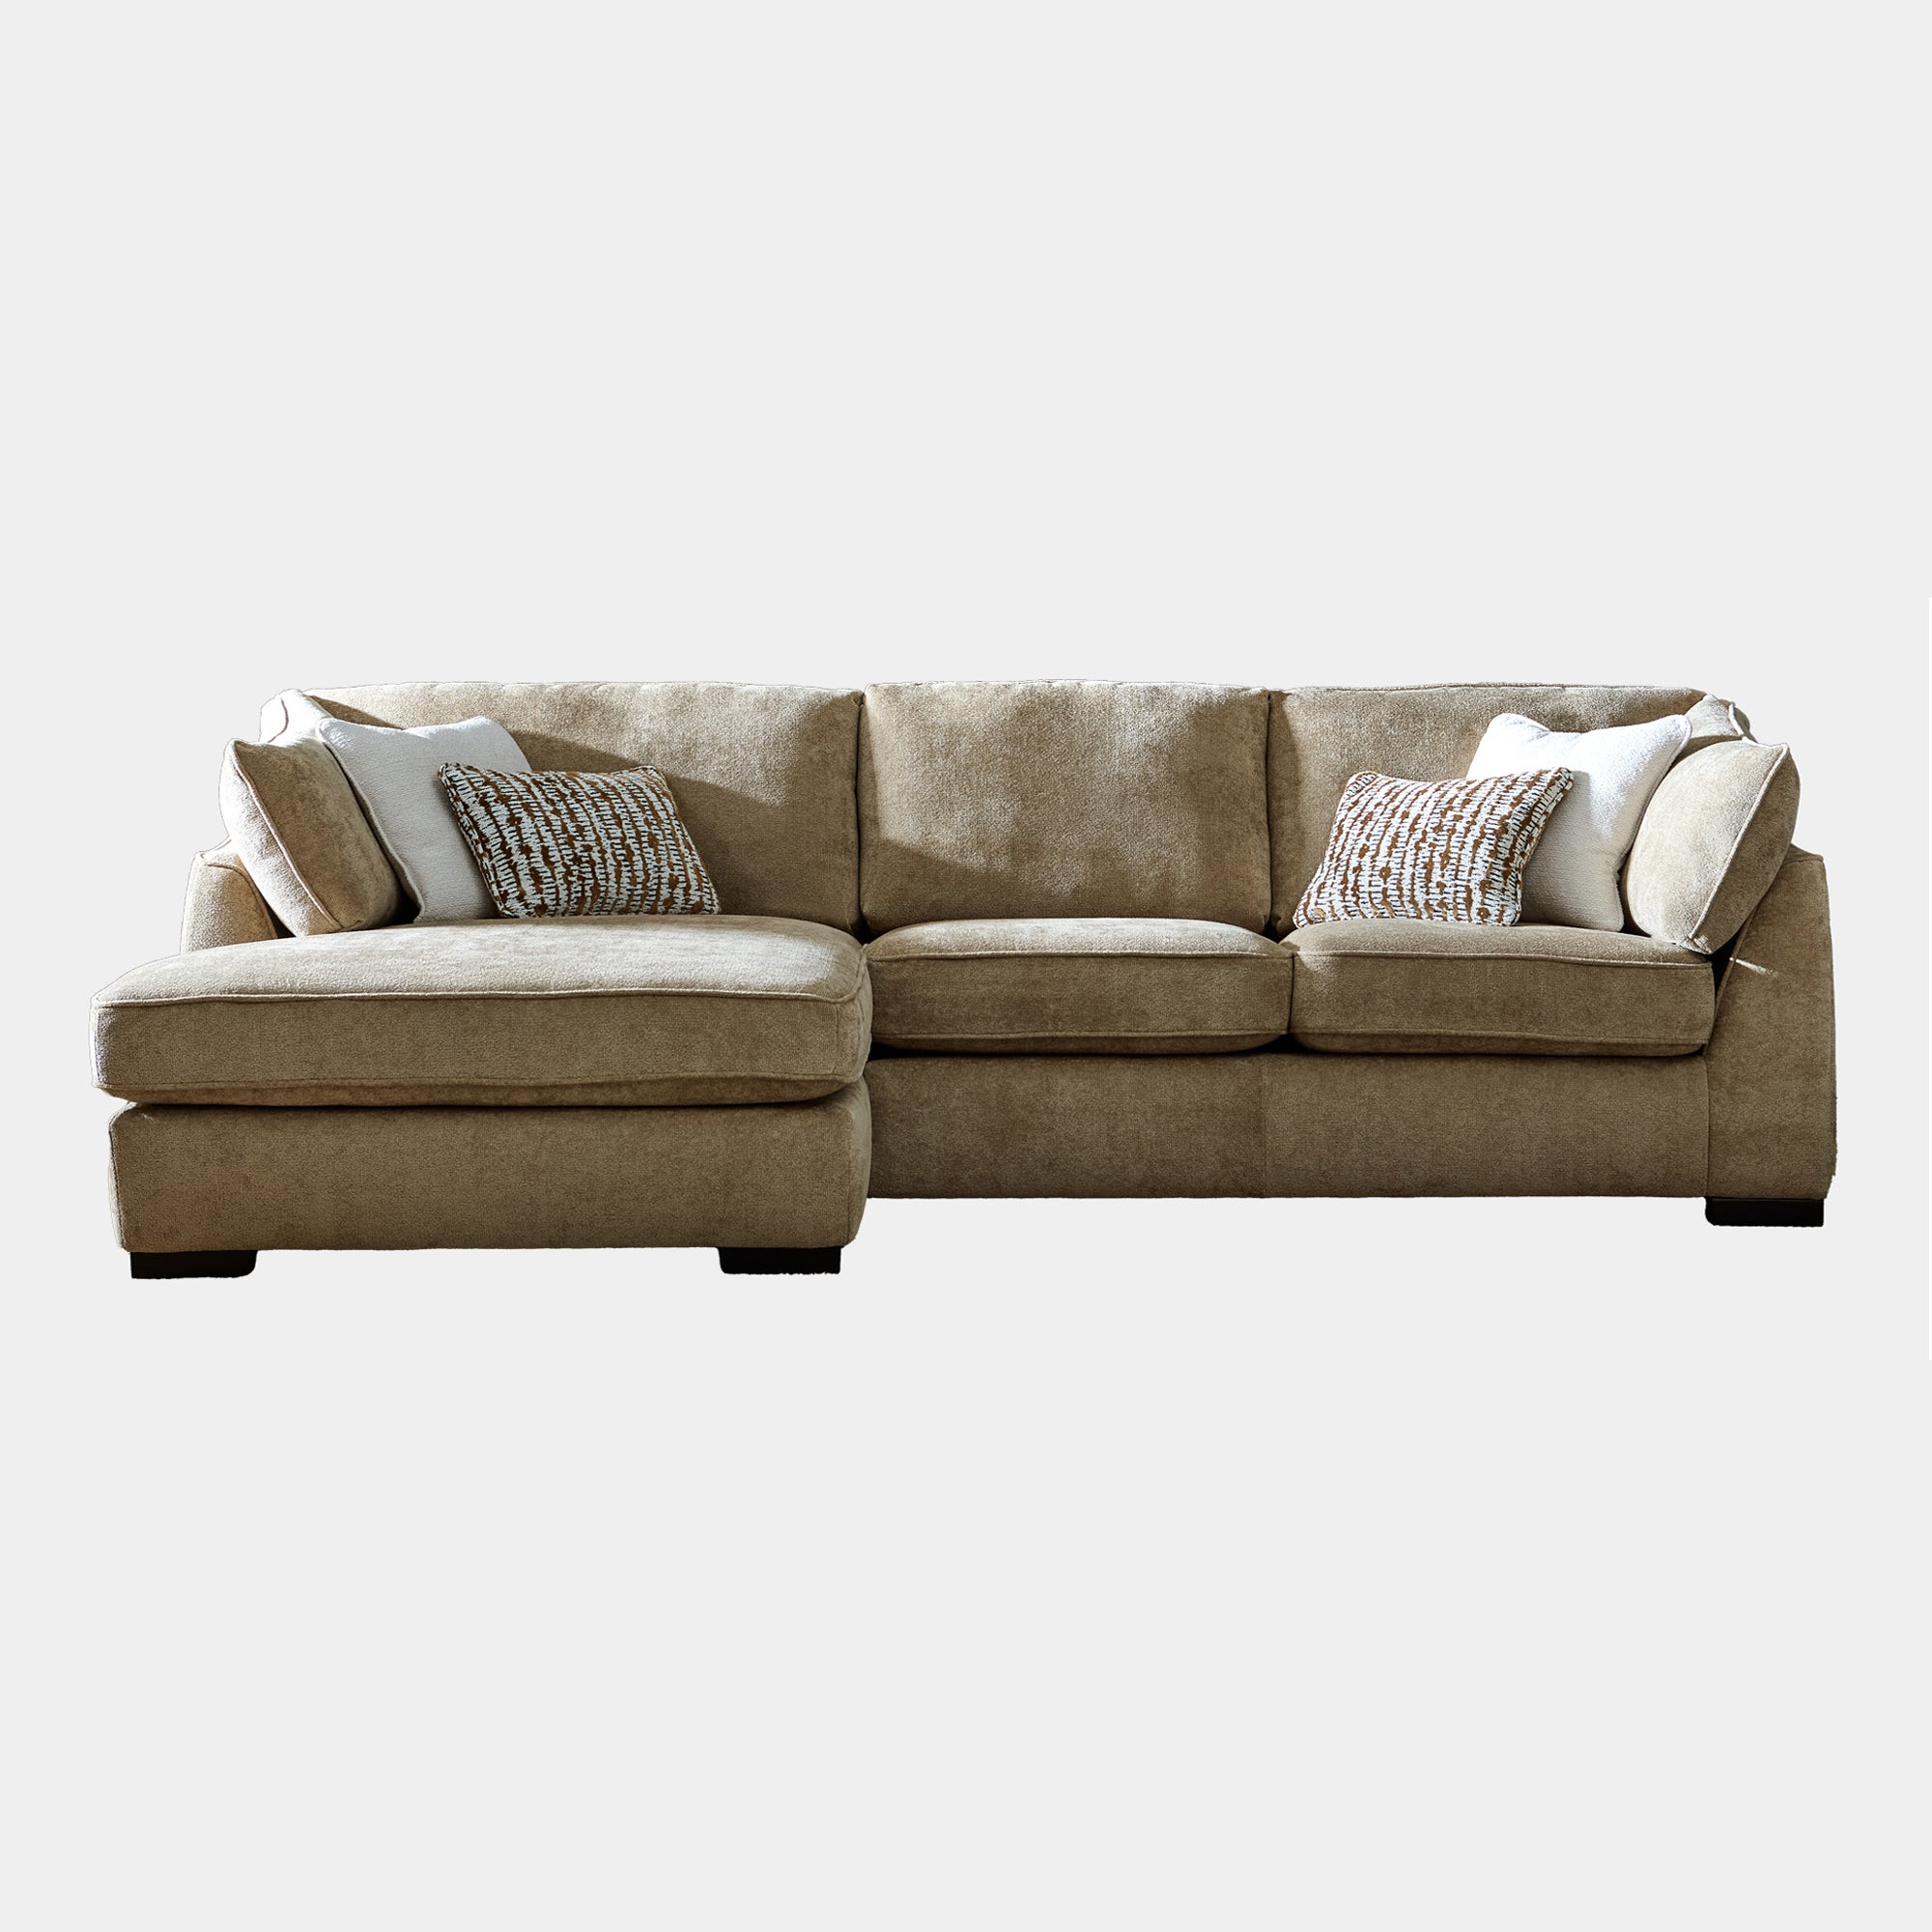 Large LHF Chaise Group (LHF Chaise + RHF Large Sofa) In Fabric Dolce